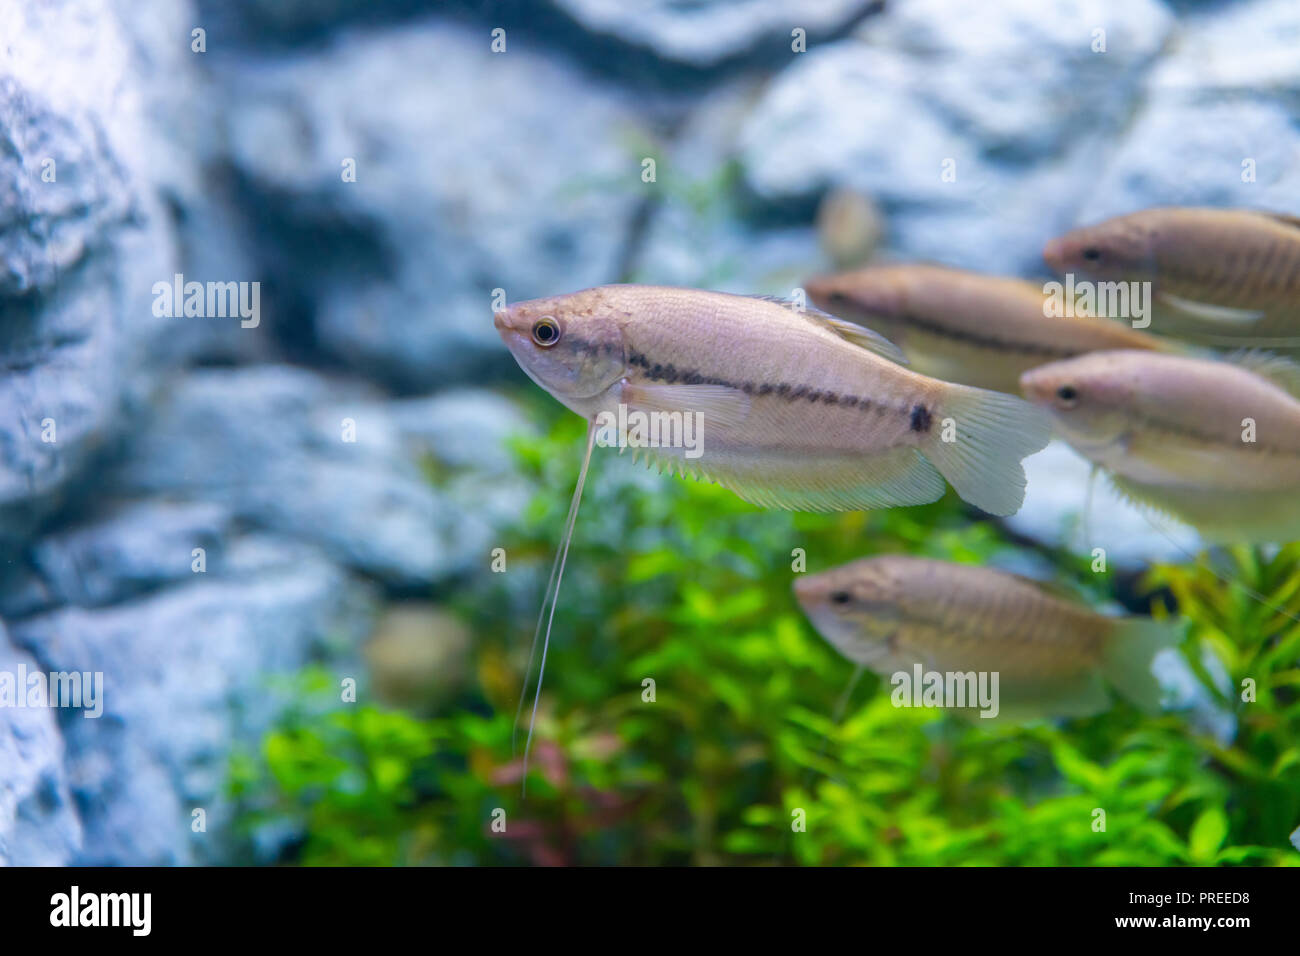 A group of snakeskin gourami fish in a private aquarium Stock Photo